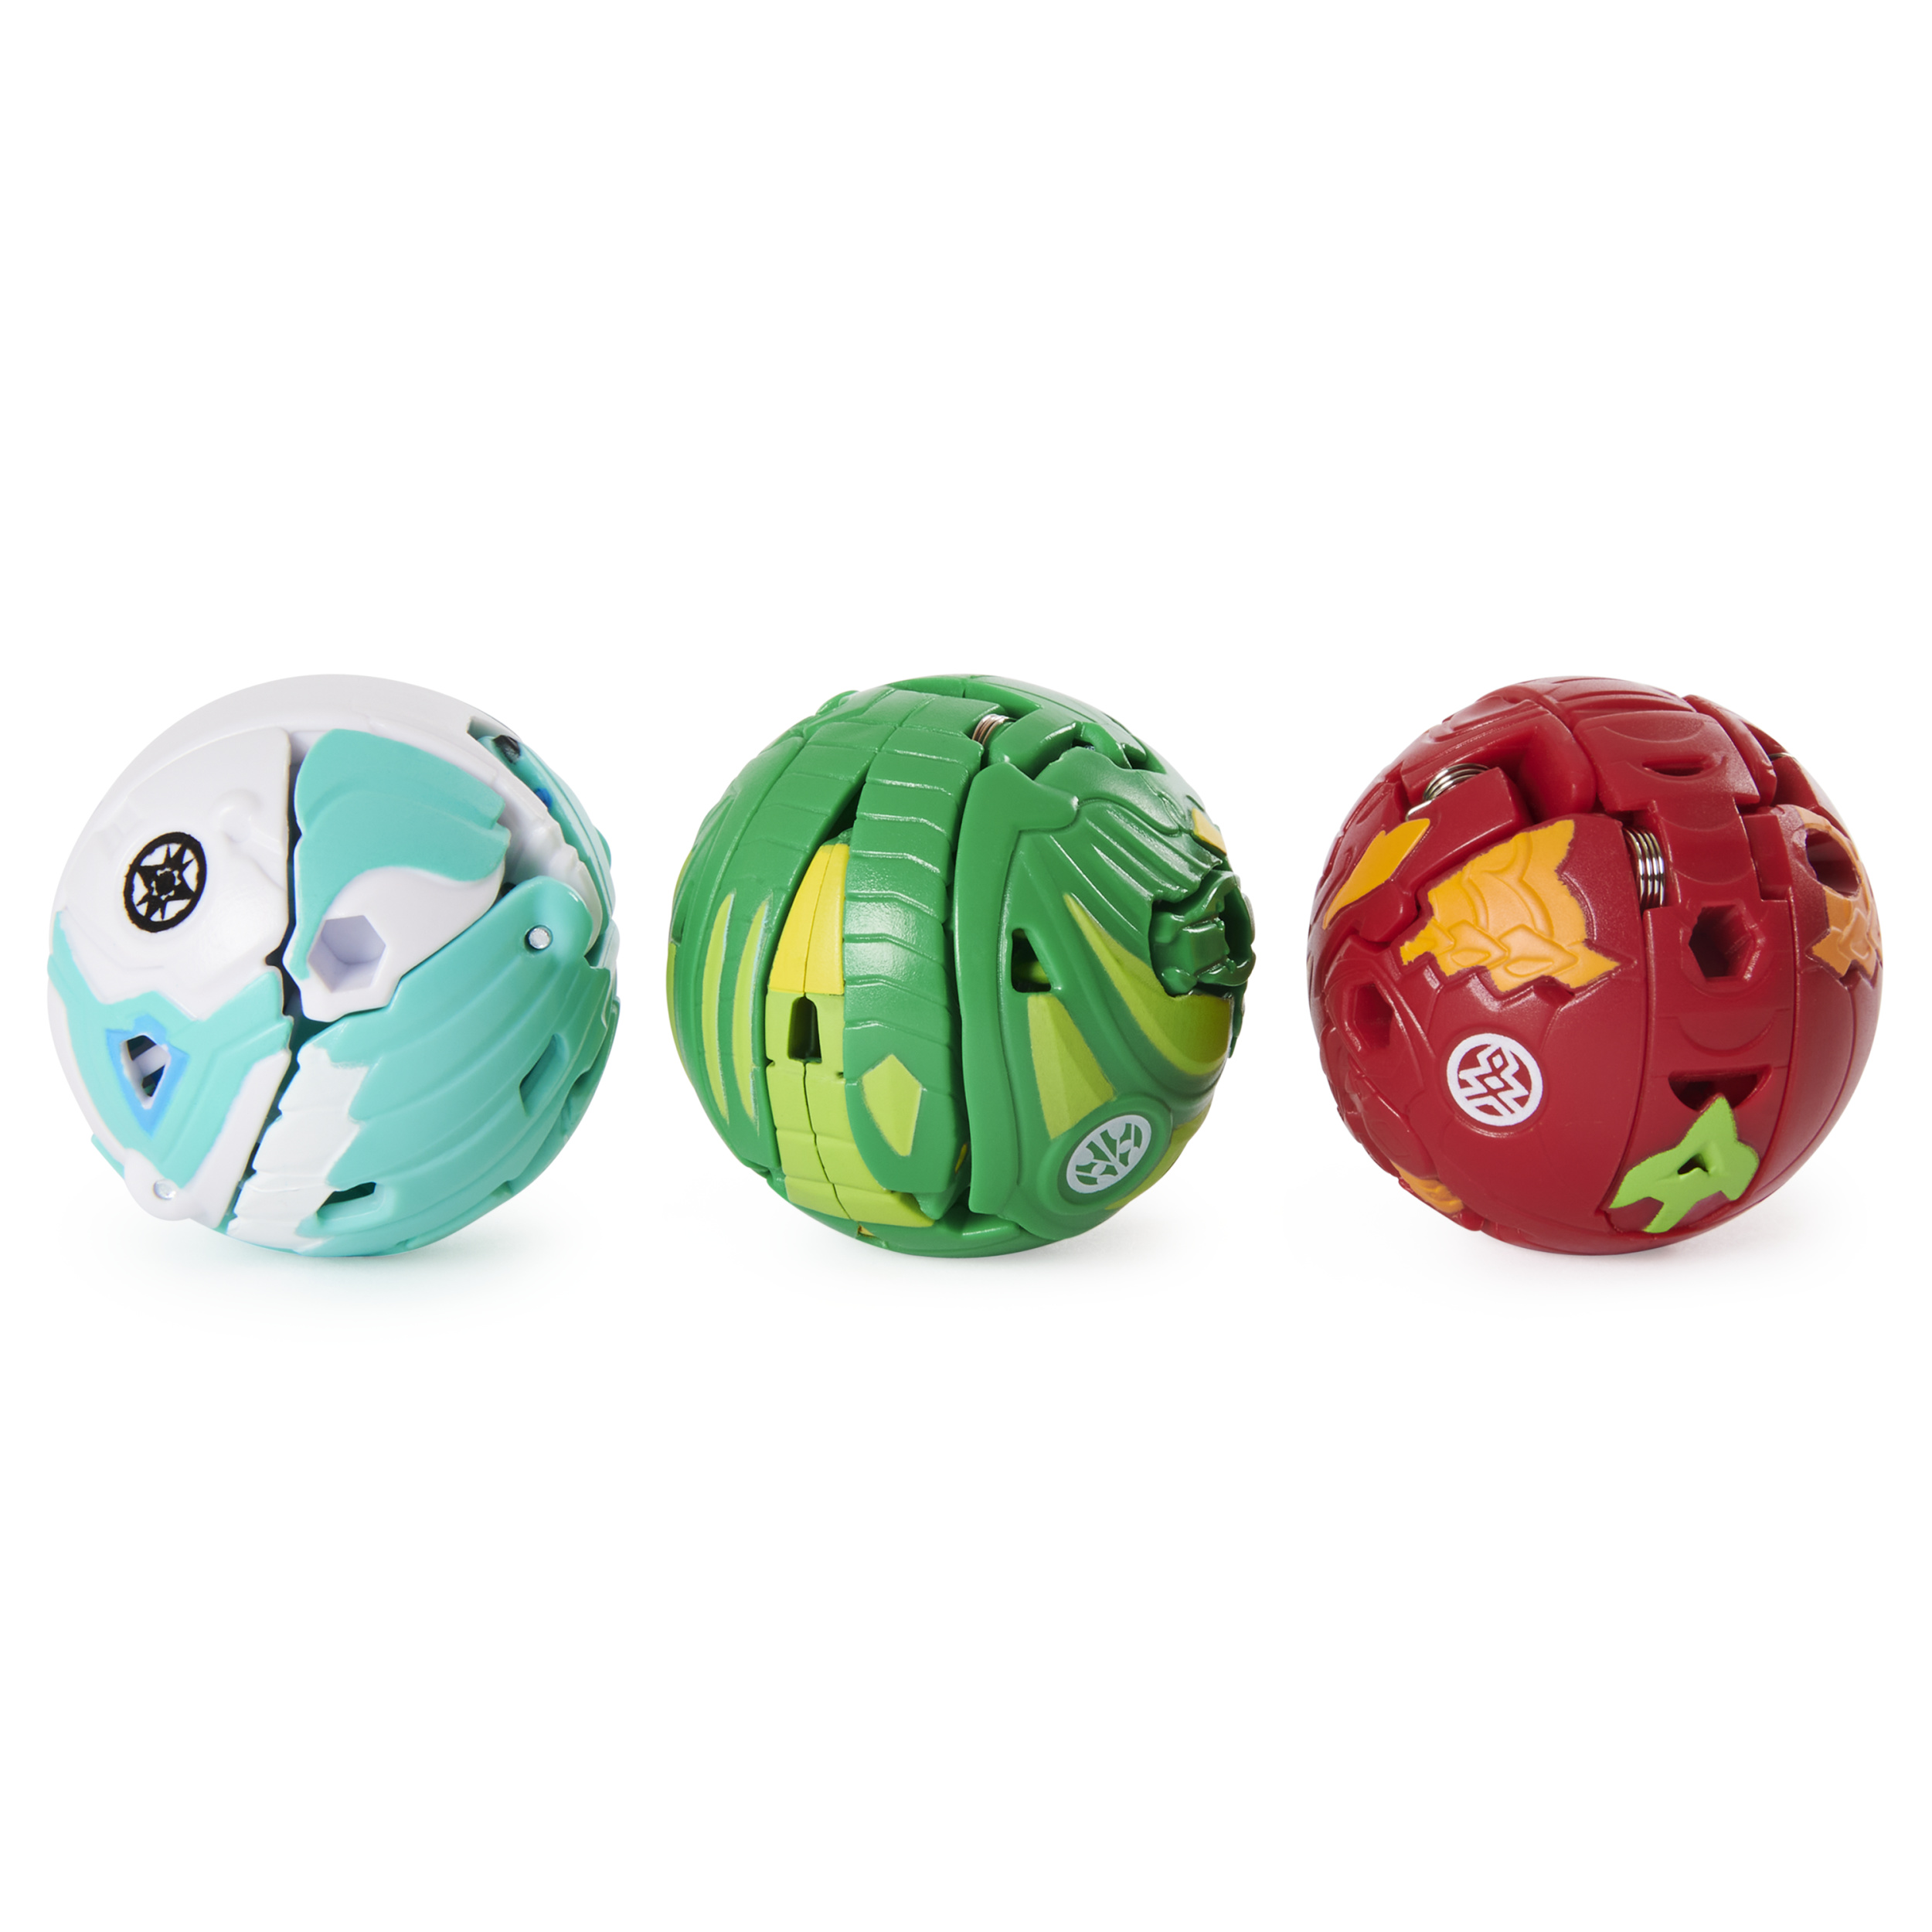 Bakugan Pro, Armored Elite Starter Set with Hydorous Ultra, 2 Bakugan and Collectible Trading Cards - image 4 of 5